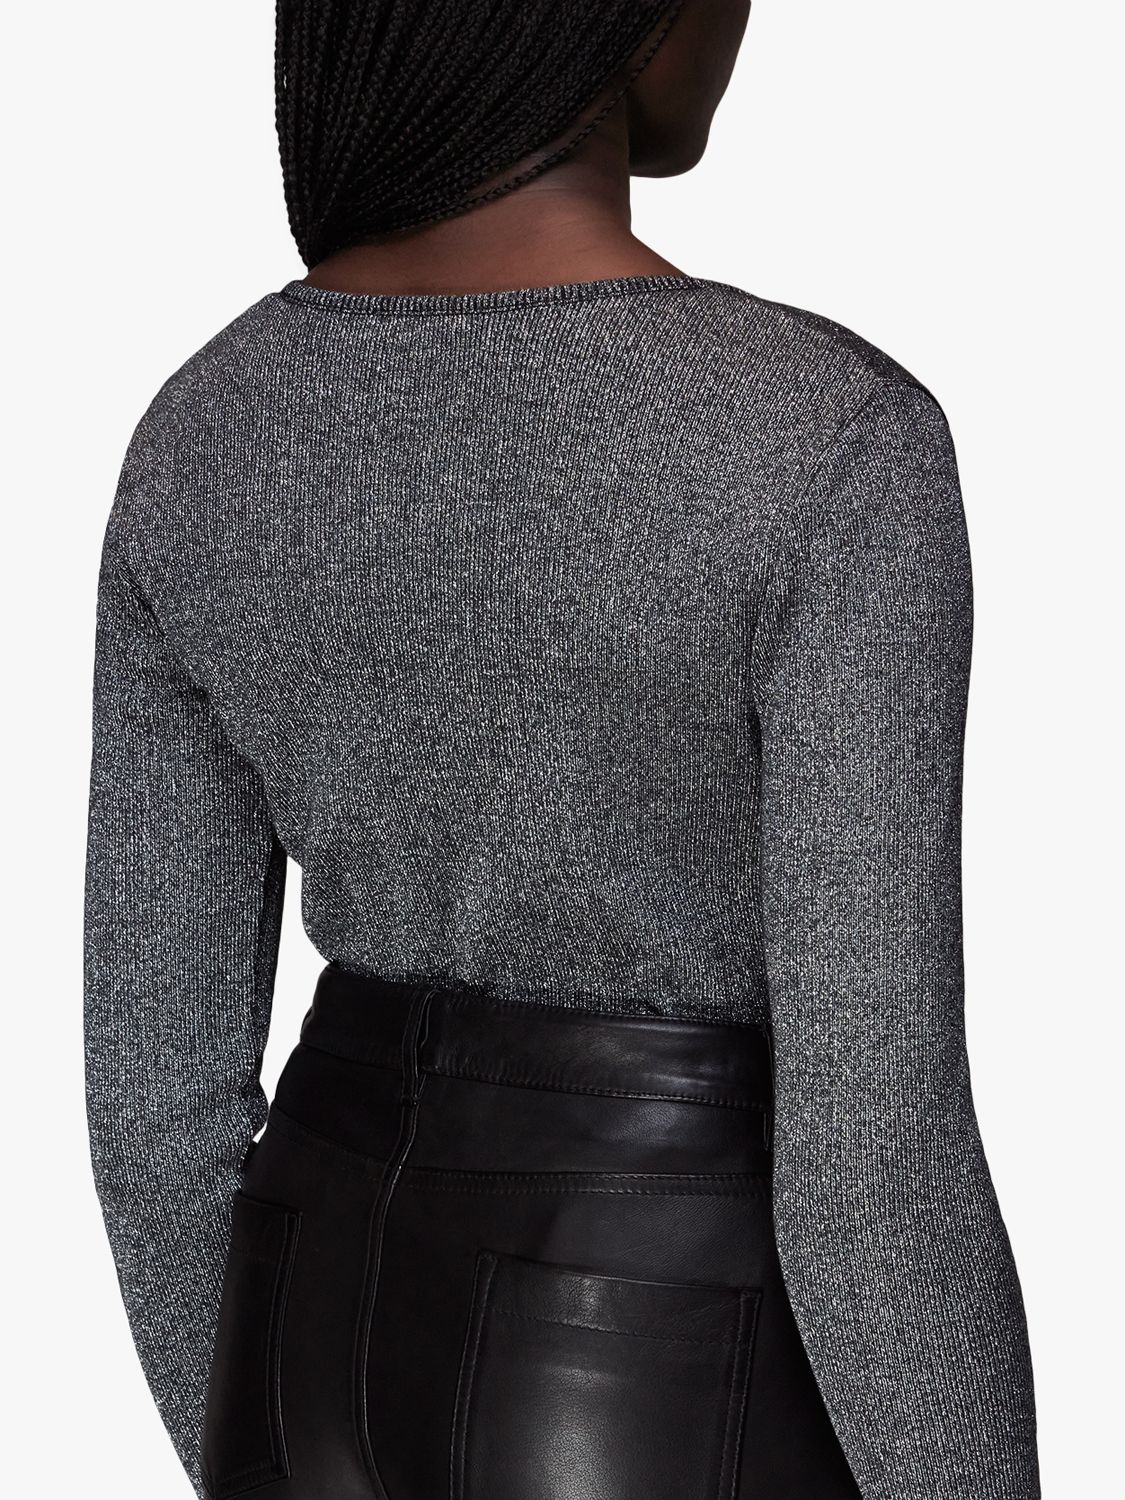 Buy Whistles Sparkle Long Sleeve Top Online at johnlewis.com